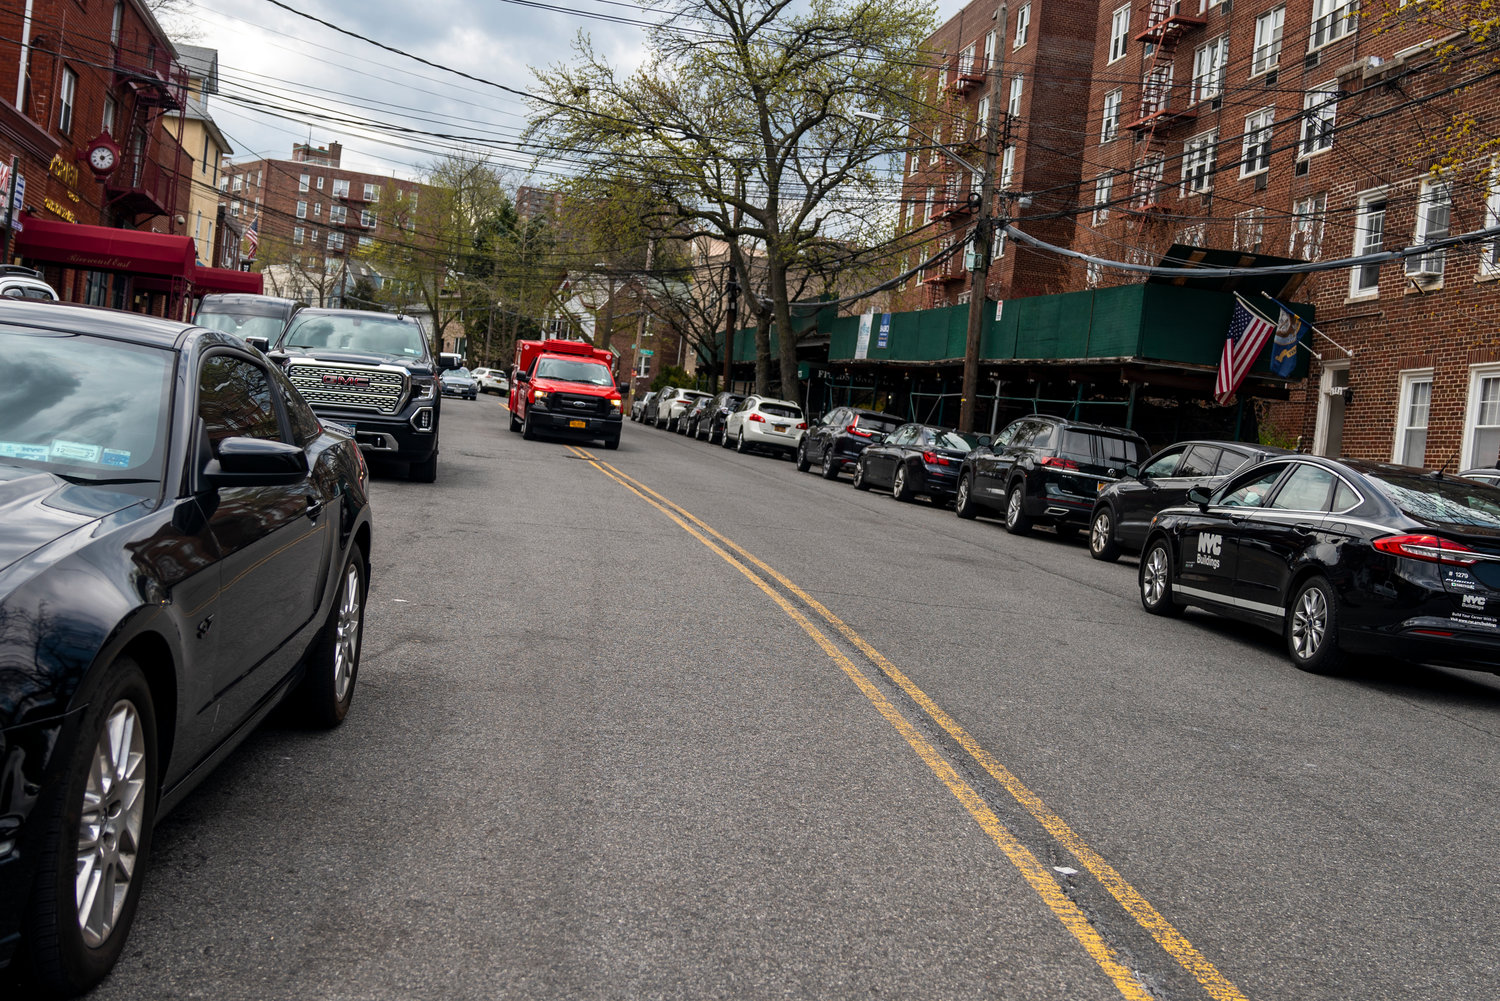 The question addressed to Community Board 8’s traffic and transportation committee: Should the neighborhood prioritize bicycle lanes or double-parking? And while the committee established double-parking was still illegal, bike riders didn’t fare well, as the committee struck down bike lanes on Mosholu Avenue.